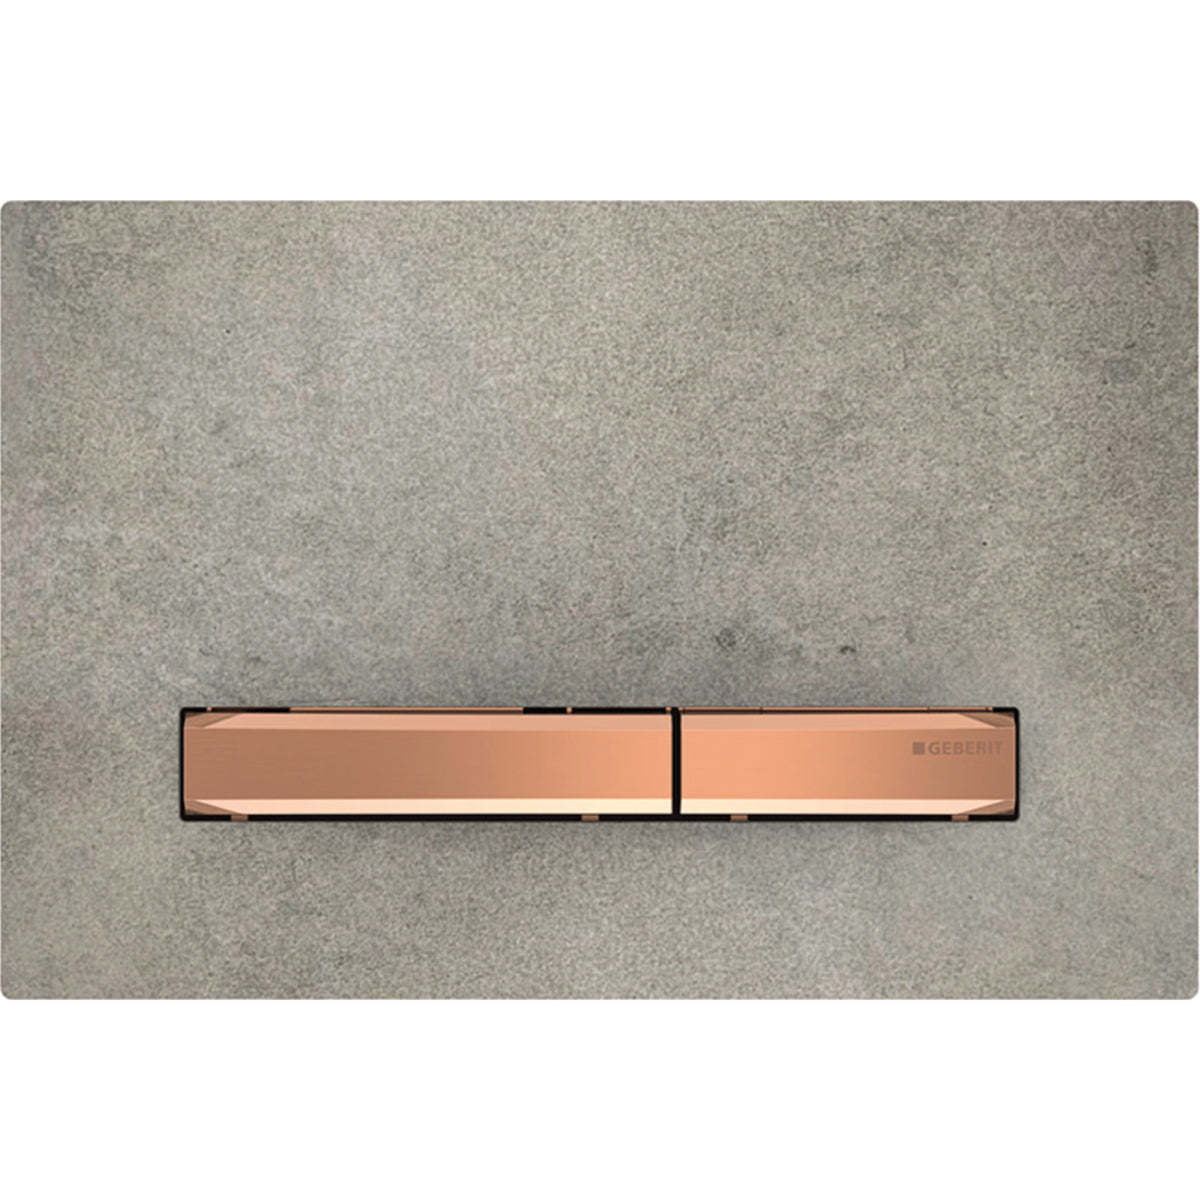 Geberit 115.670.JV.2- Geberit actuator plate Sigma50 for dual flush, metal colour red gold: red gold, concrete look - FaucetExpress.ca